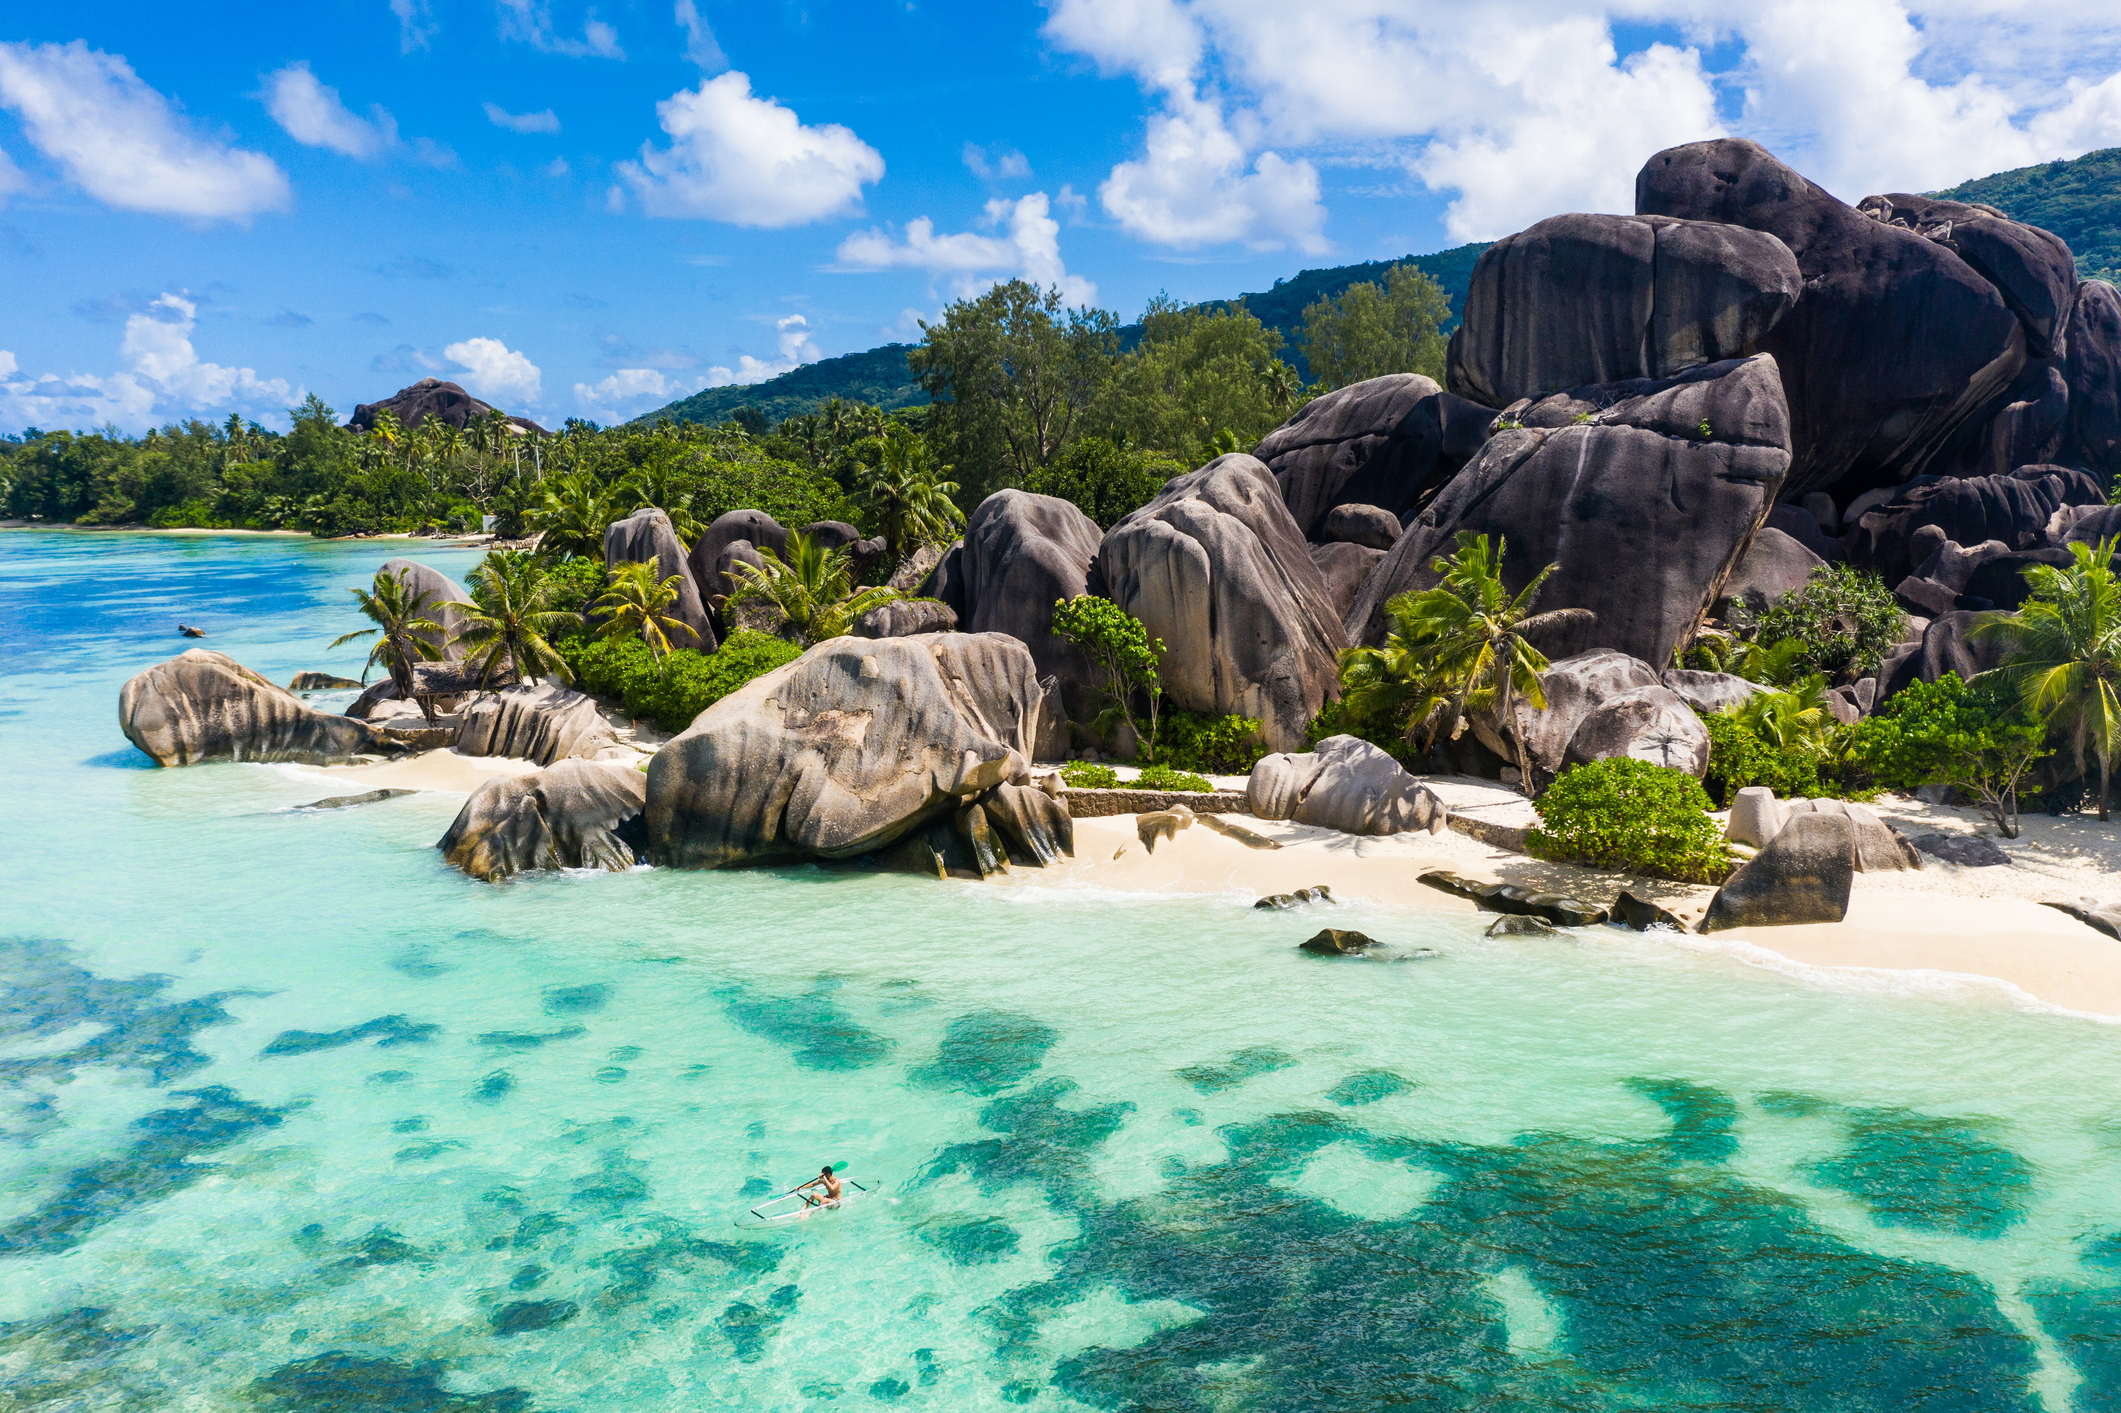 The Seychelles is a top yachting destination on account of beaches like these. (photo: iStock)